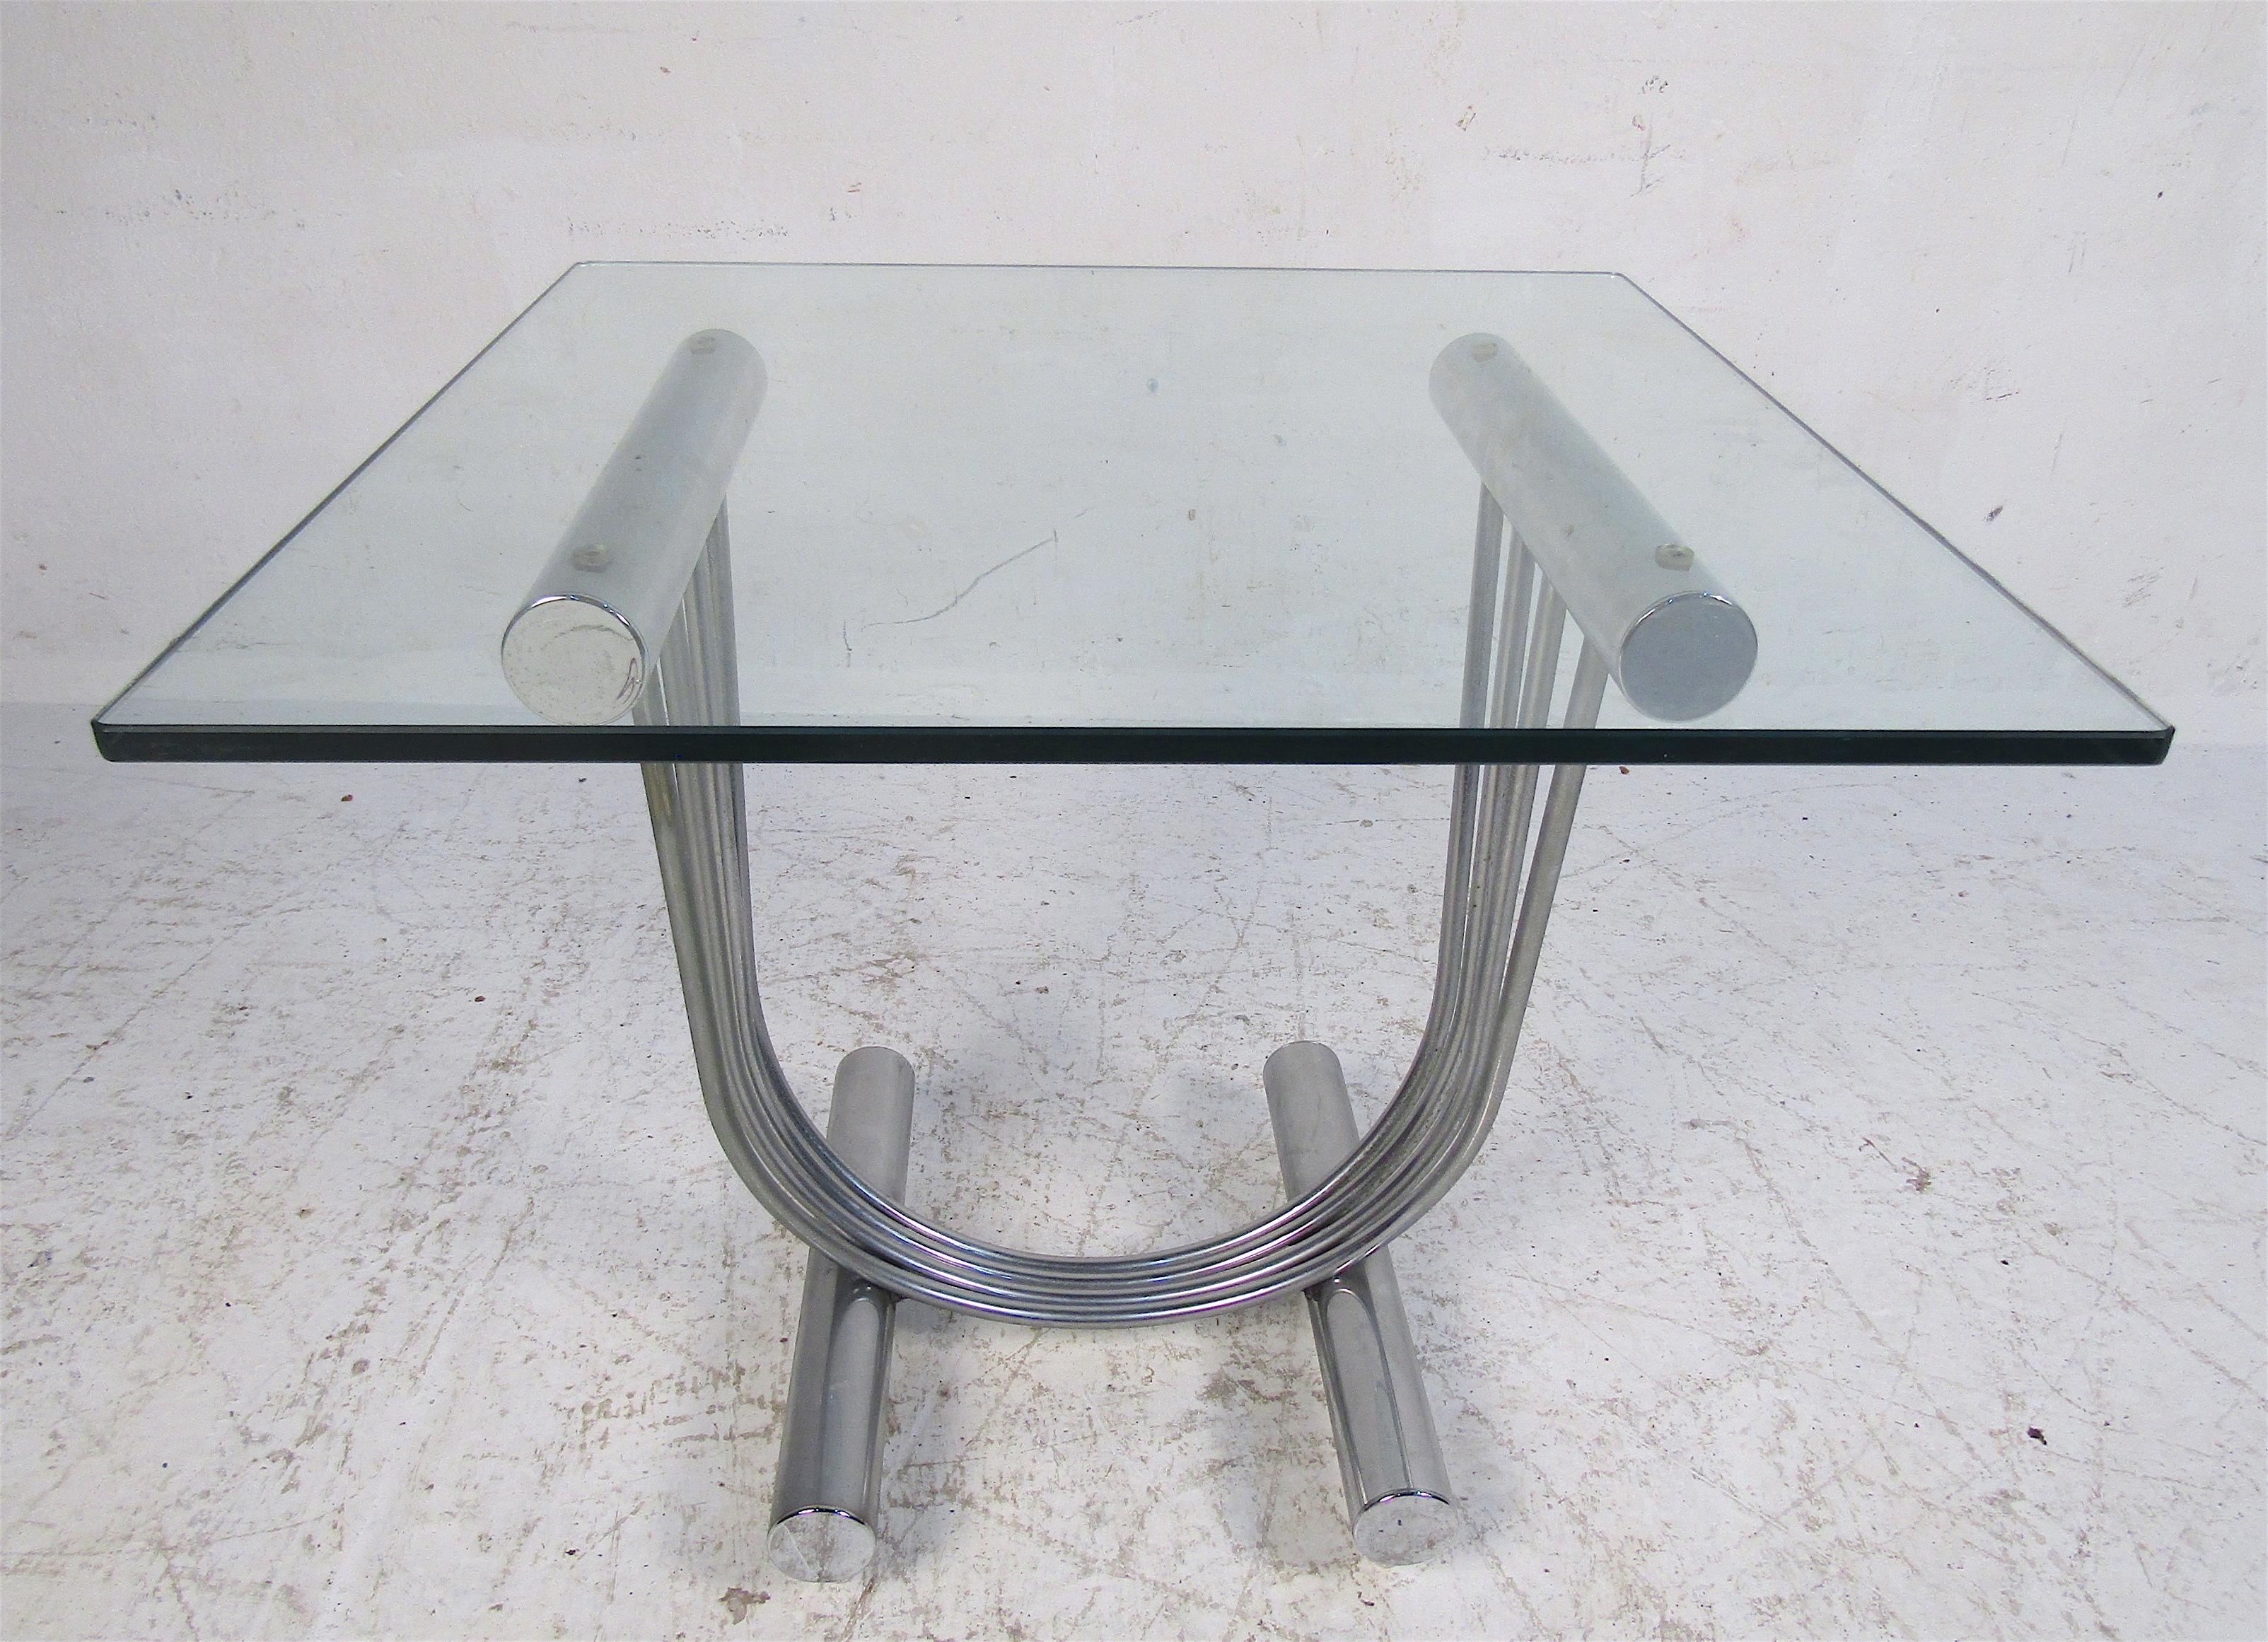 This beautiful vintage pair of modern side tables feature a chrome harp shaped base and a thick square glass top. A sleek and sturdy design that is sure to complement any modern interior. In the style of Design Institute of America. Please confirm